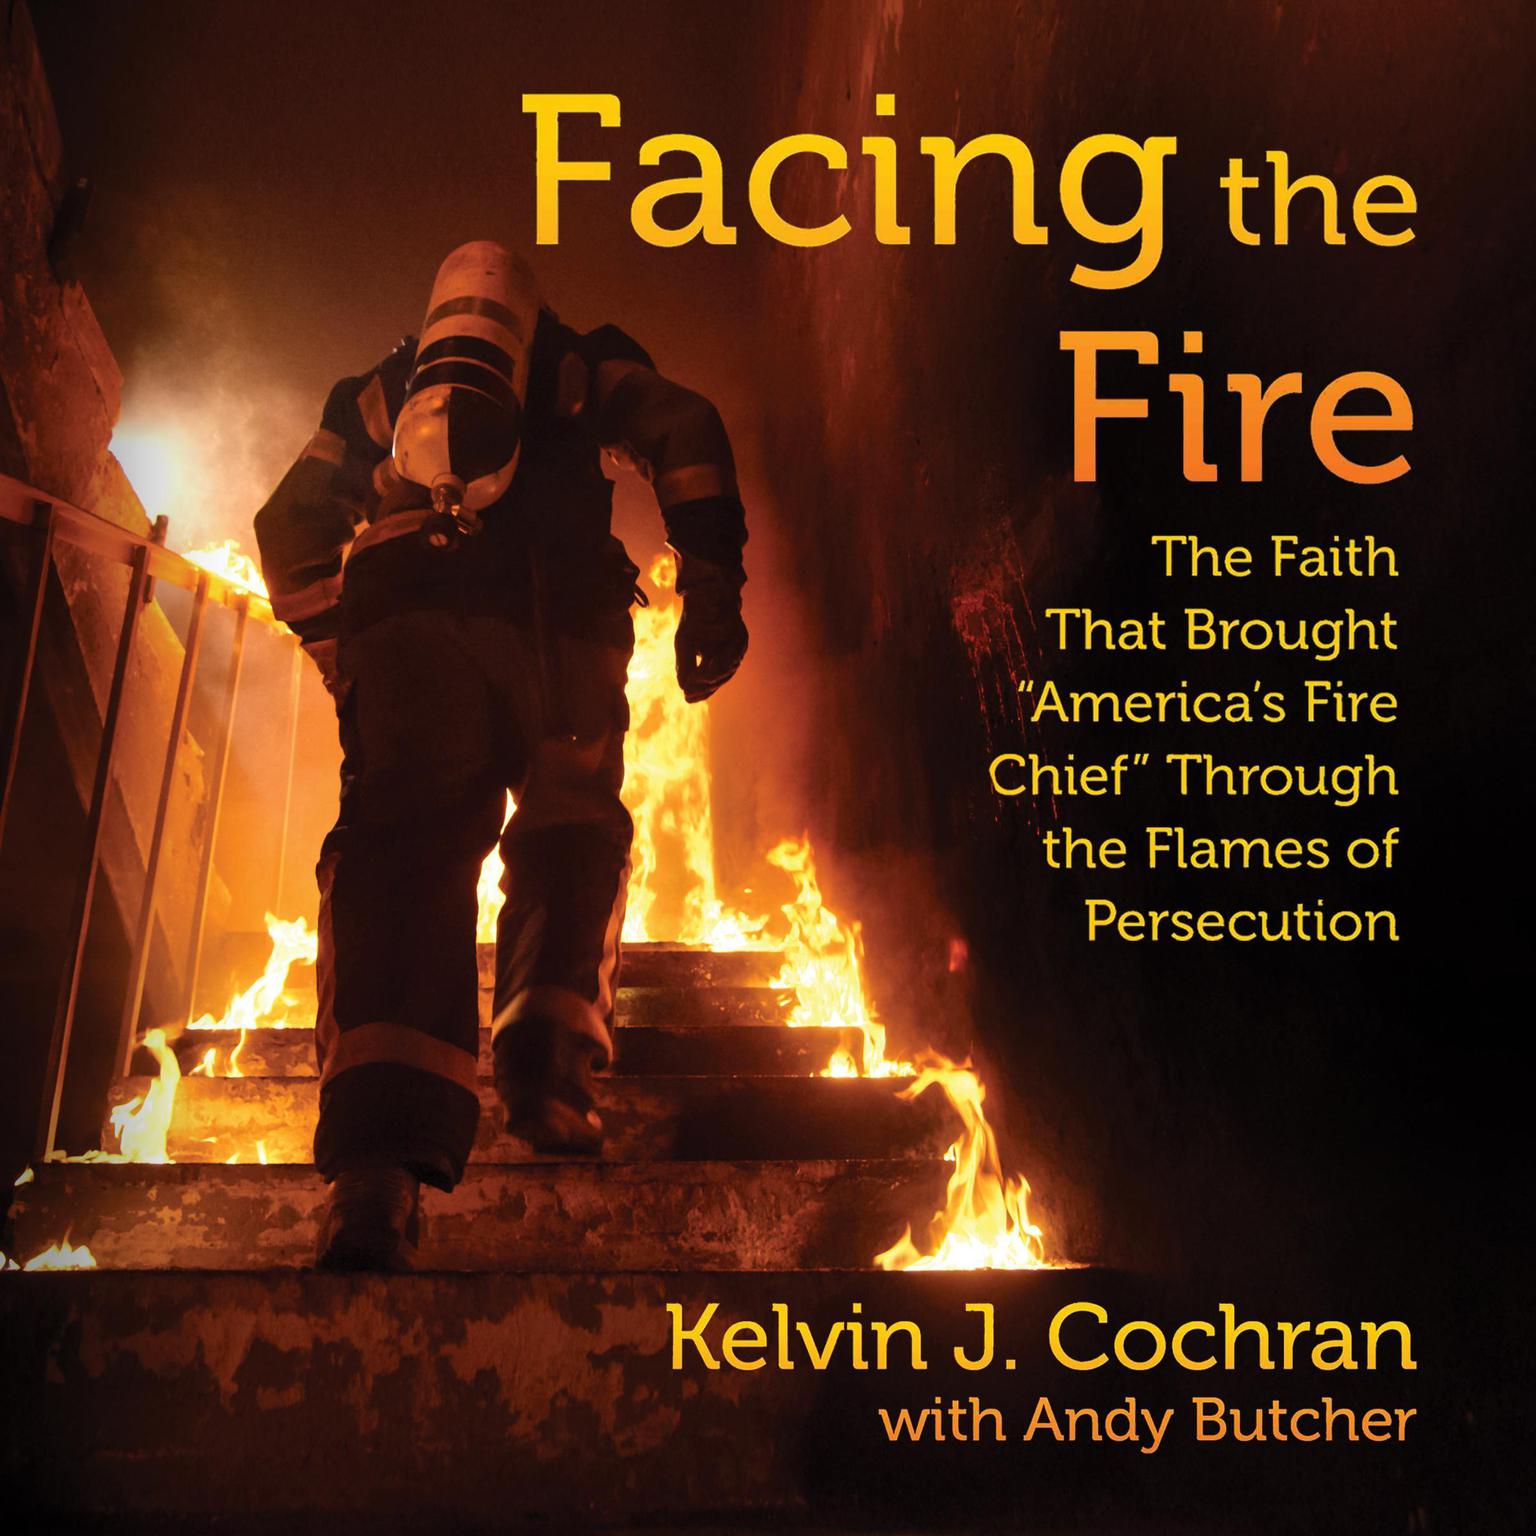 Facing the Fire: The Faith That Brought Americas Fire Chief Through the Flames of Persecution Audiobook, by Kelvin J. Cochran